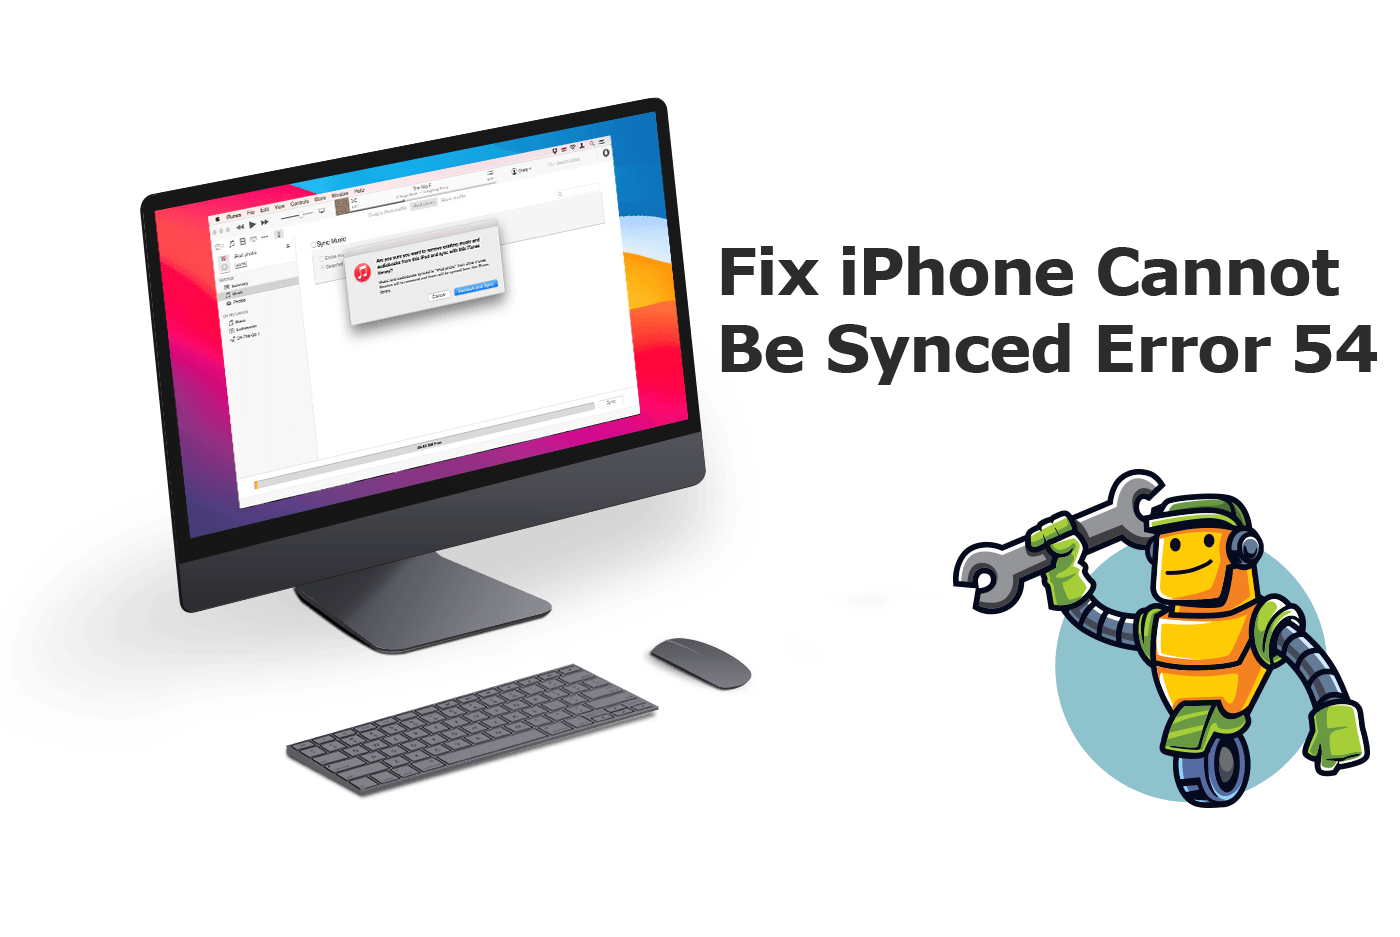 How To Fix iPhone Cannot Be Synced Error 54